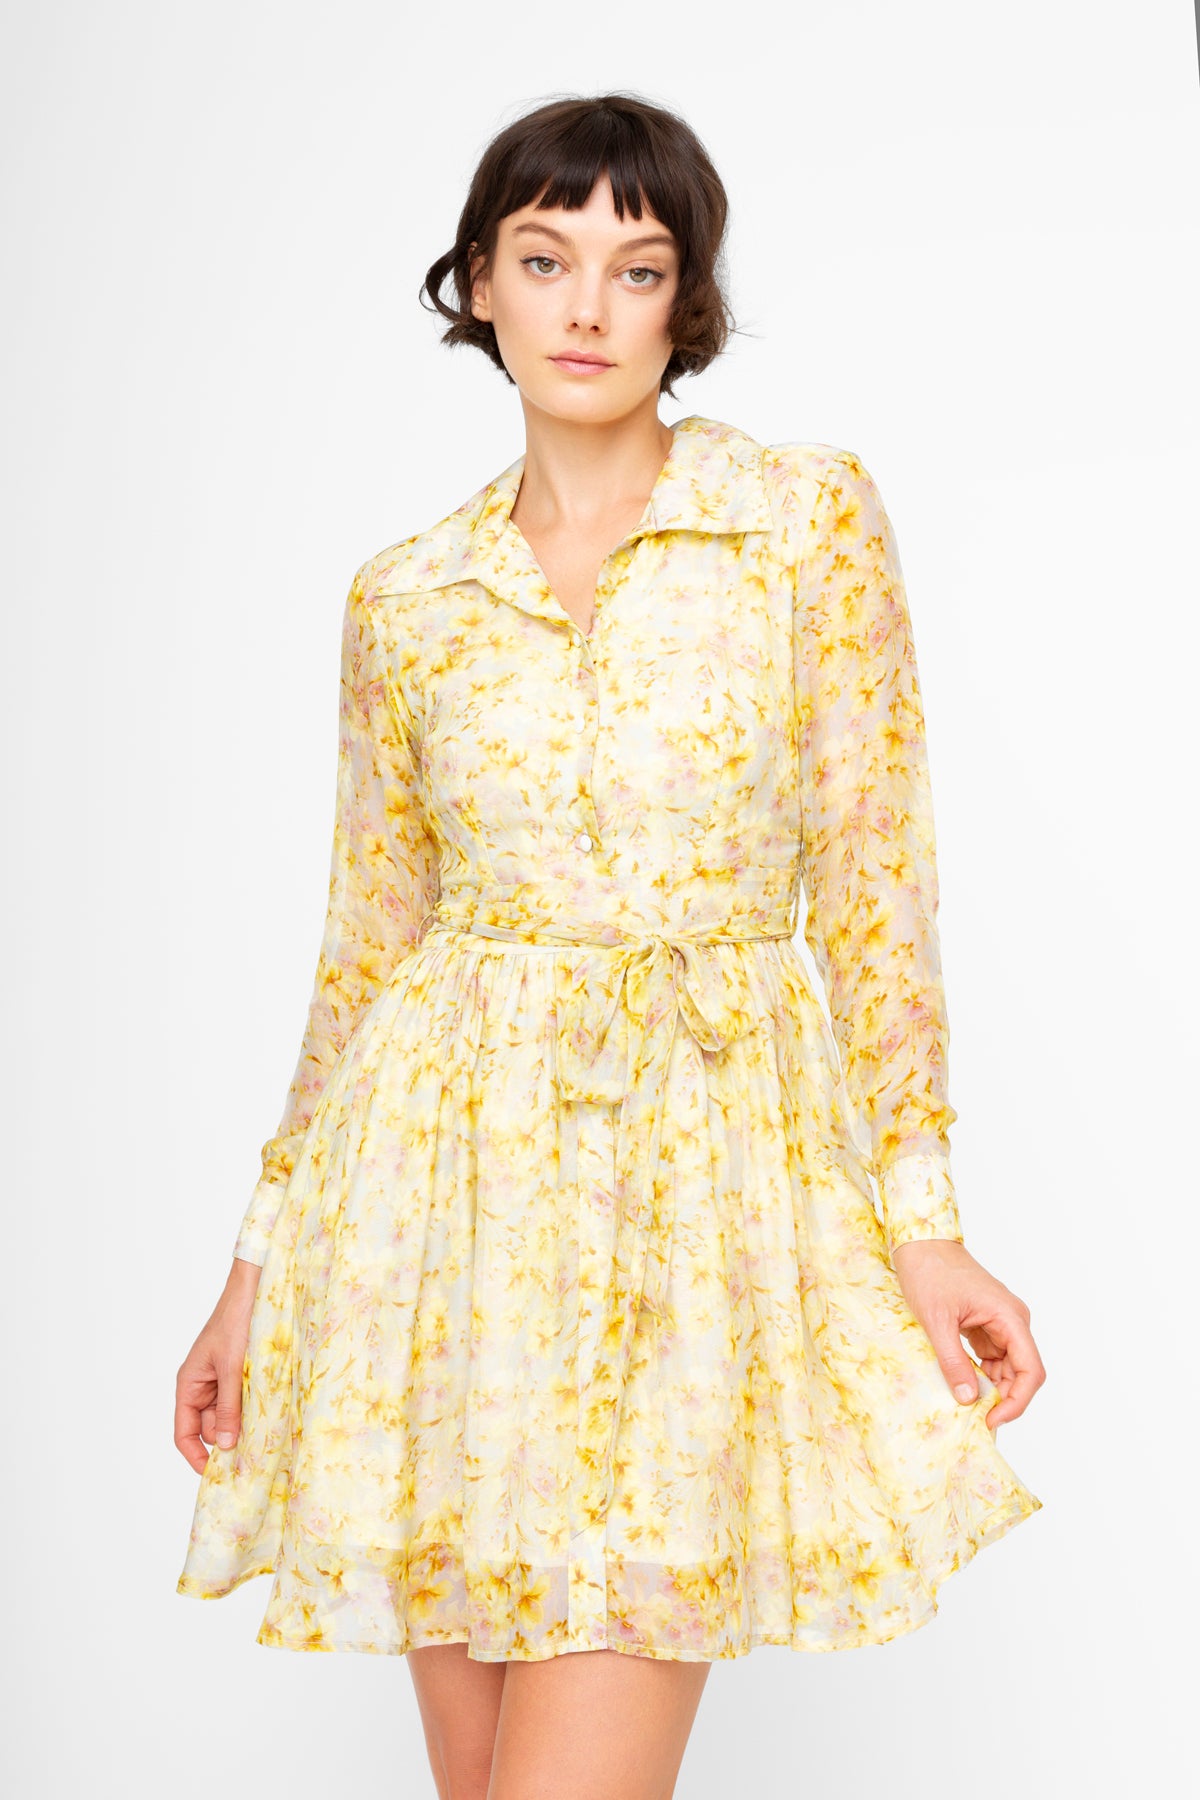 long sleeve yellow floral dress